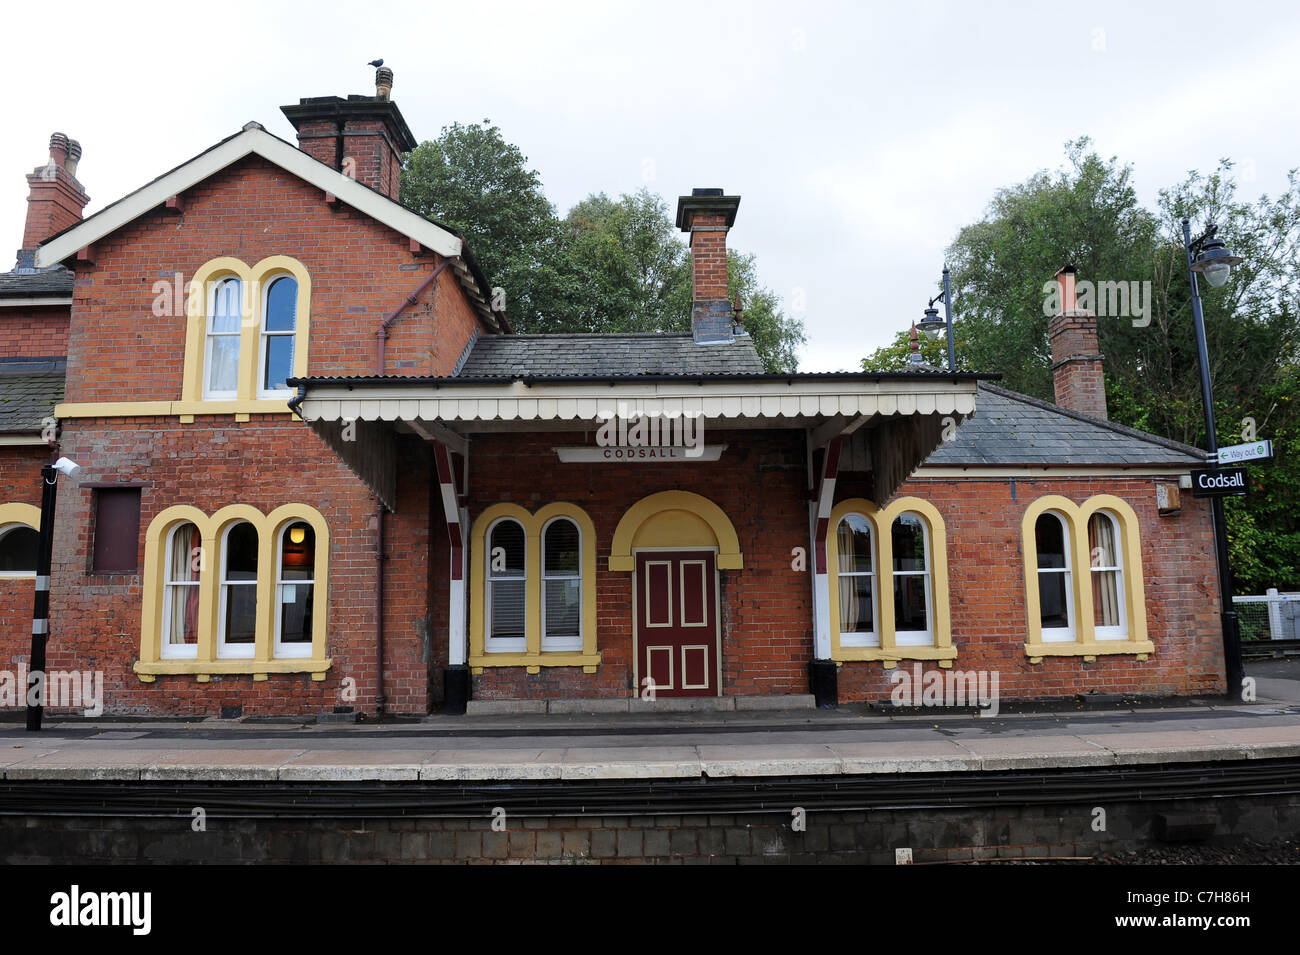 The Codsall Station pub coverted from old railway station which still has trains running past Staffordshire Uk Stock Photo